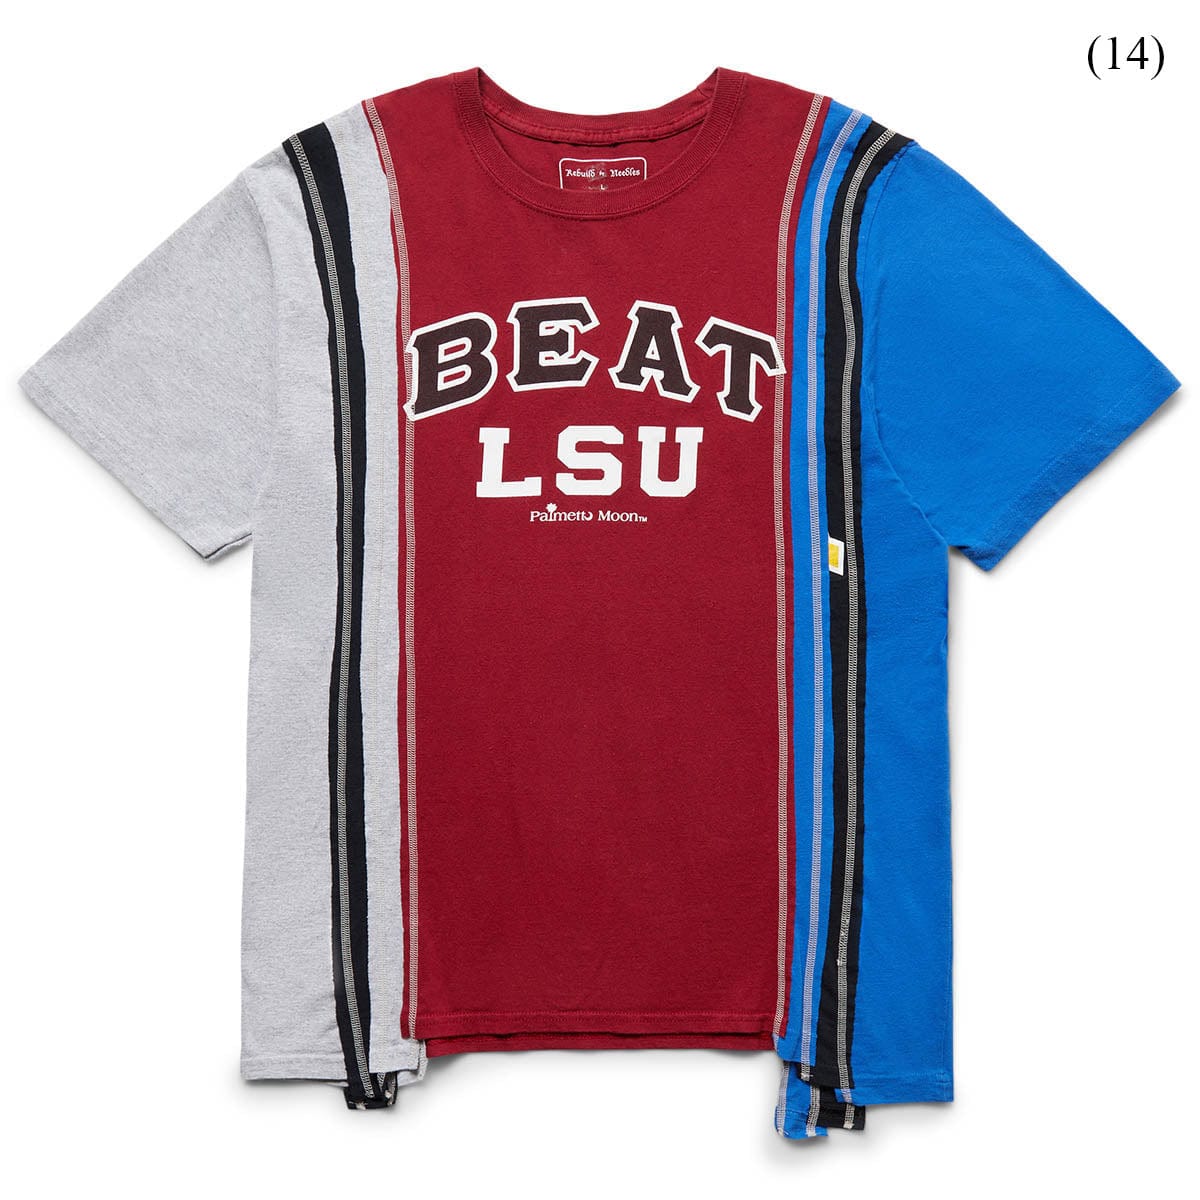 7 CUTS S/S TEE - COLLEGE (L) ASSORTED 0999